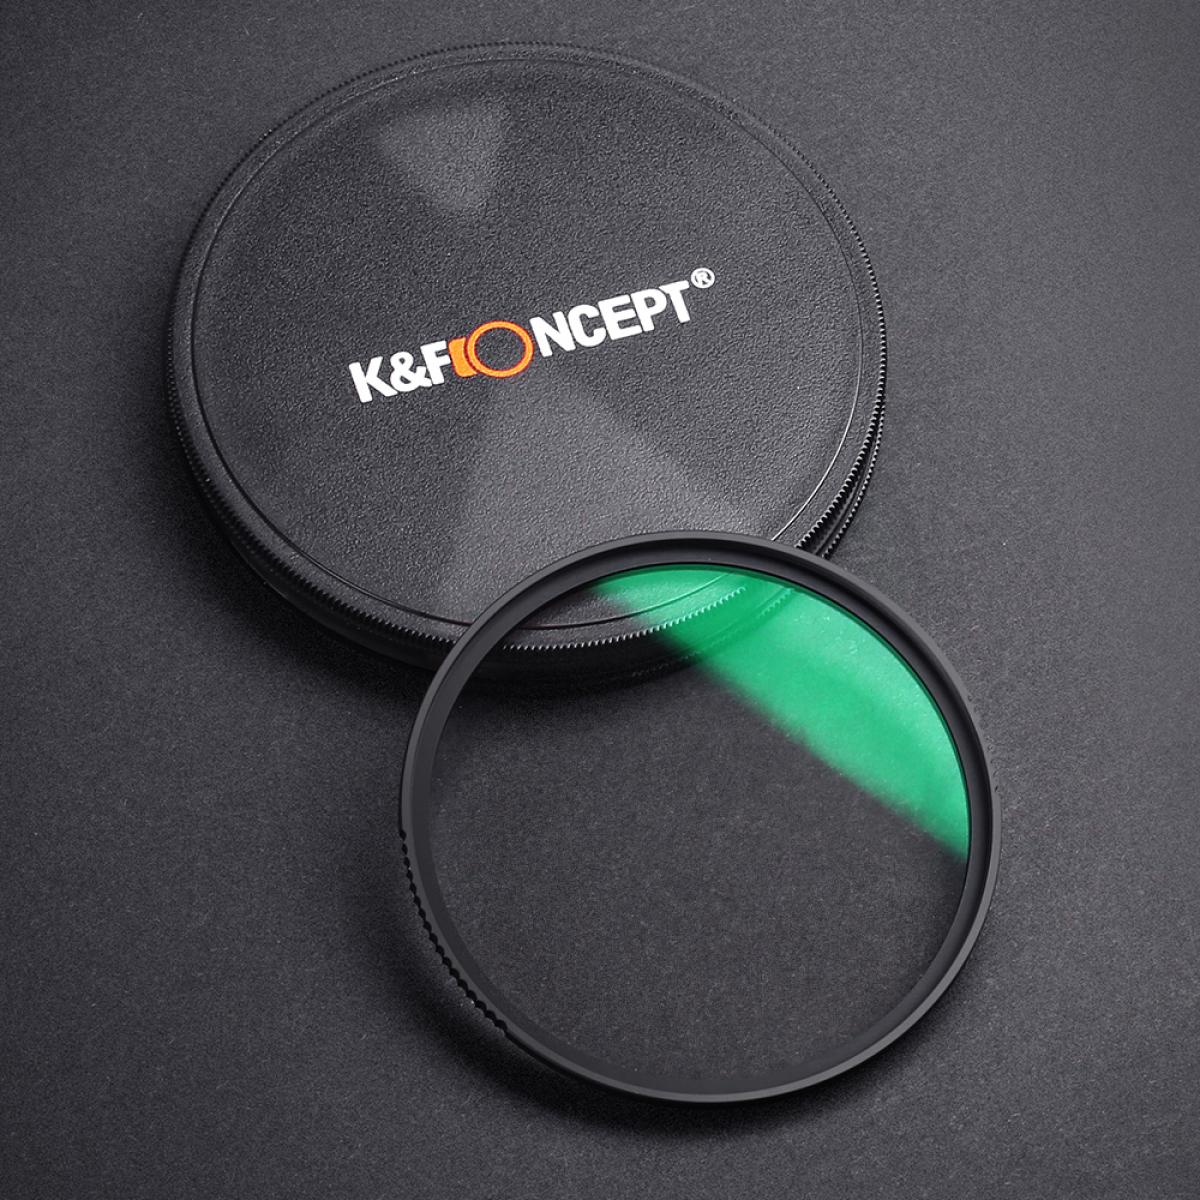 K&F Concept Black Mist Filter 1/4 Special Effect Multi Coated With Waterproof Scratch-Resistant Anti-Reflection Nano-X